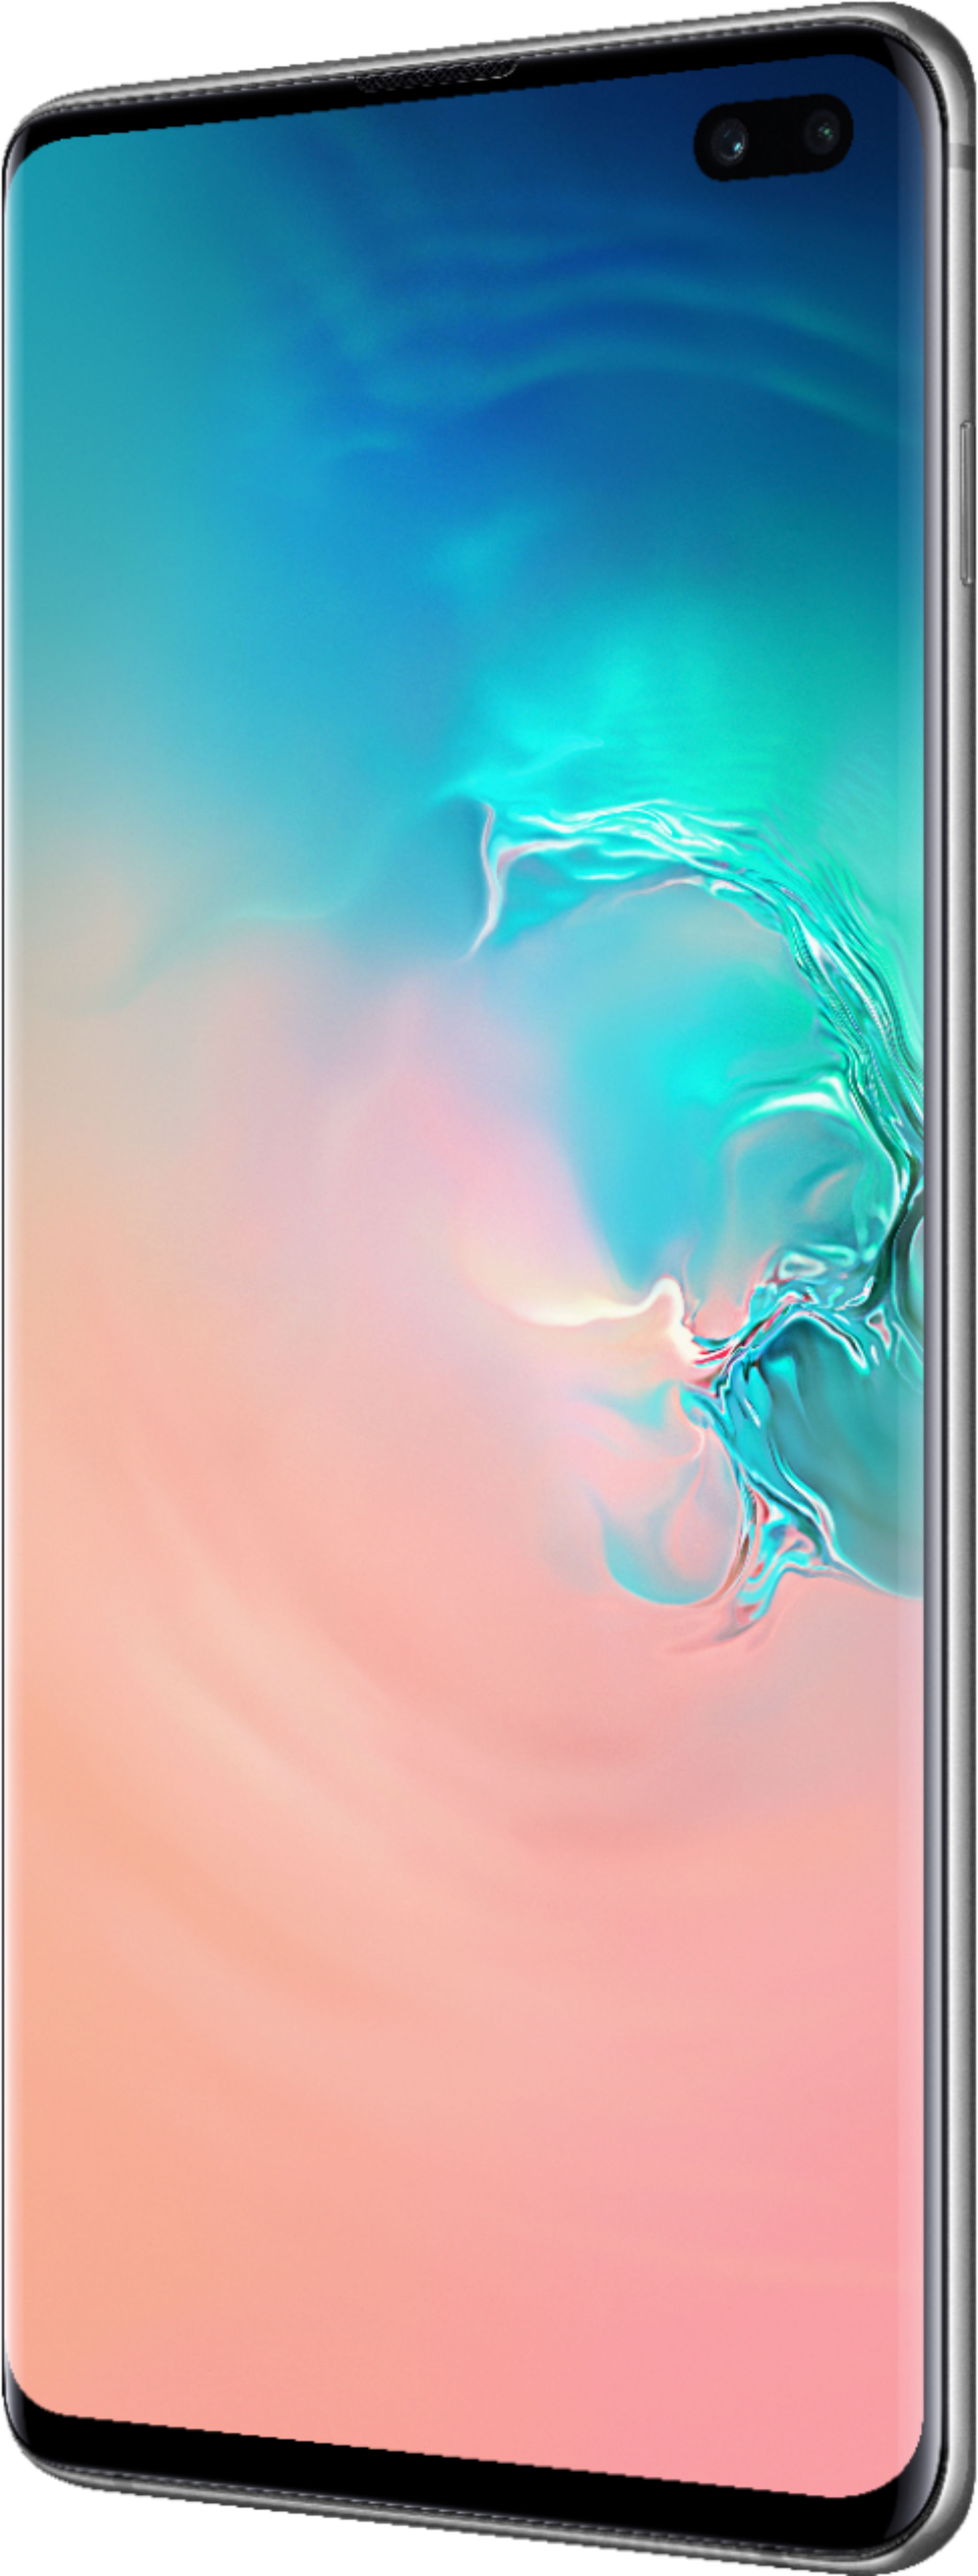 Left View: AT&T Samsung Galaxy S10+ 128GB, Prism White - Upgrade Only